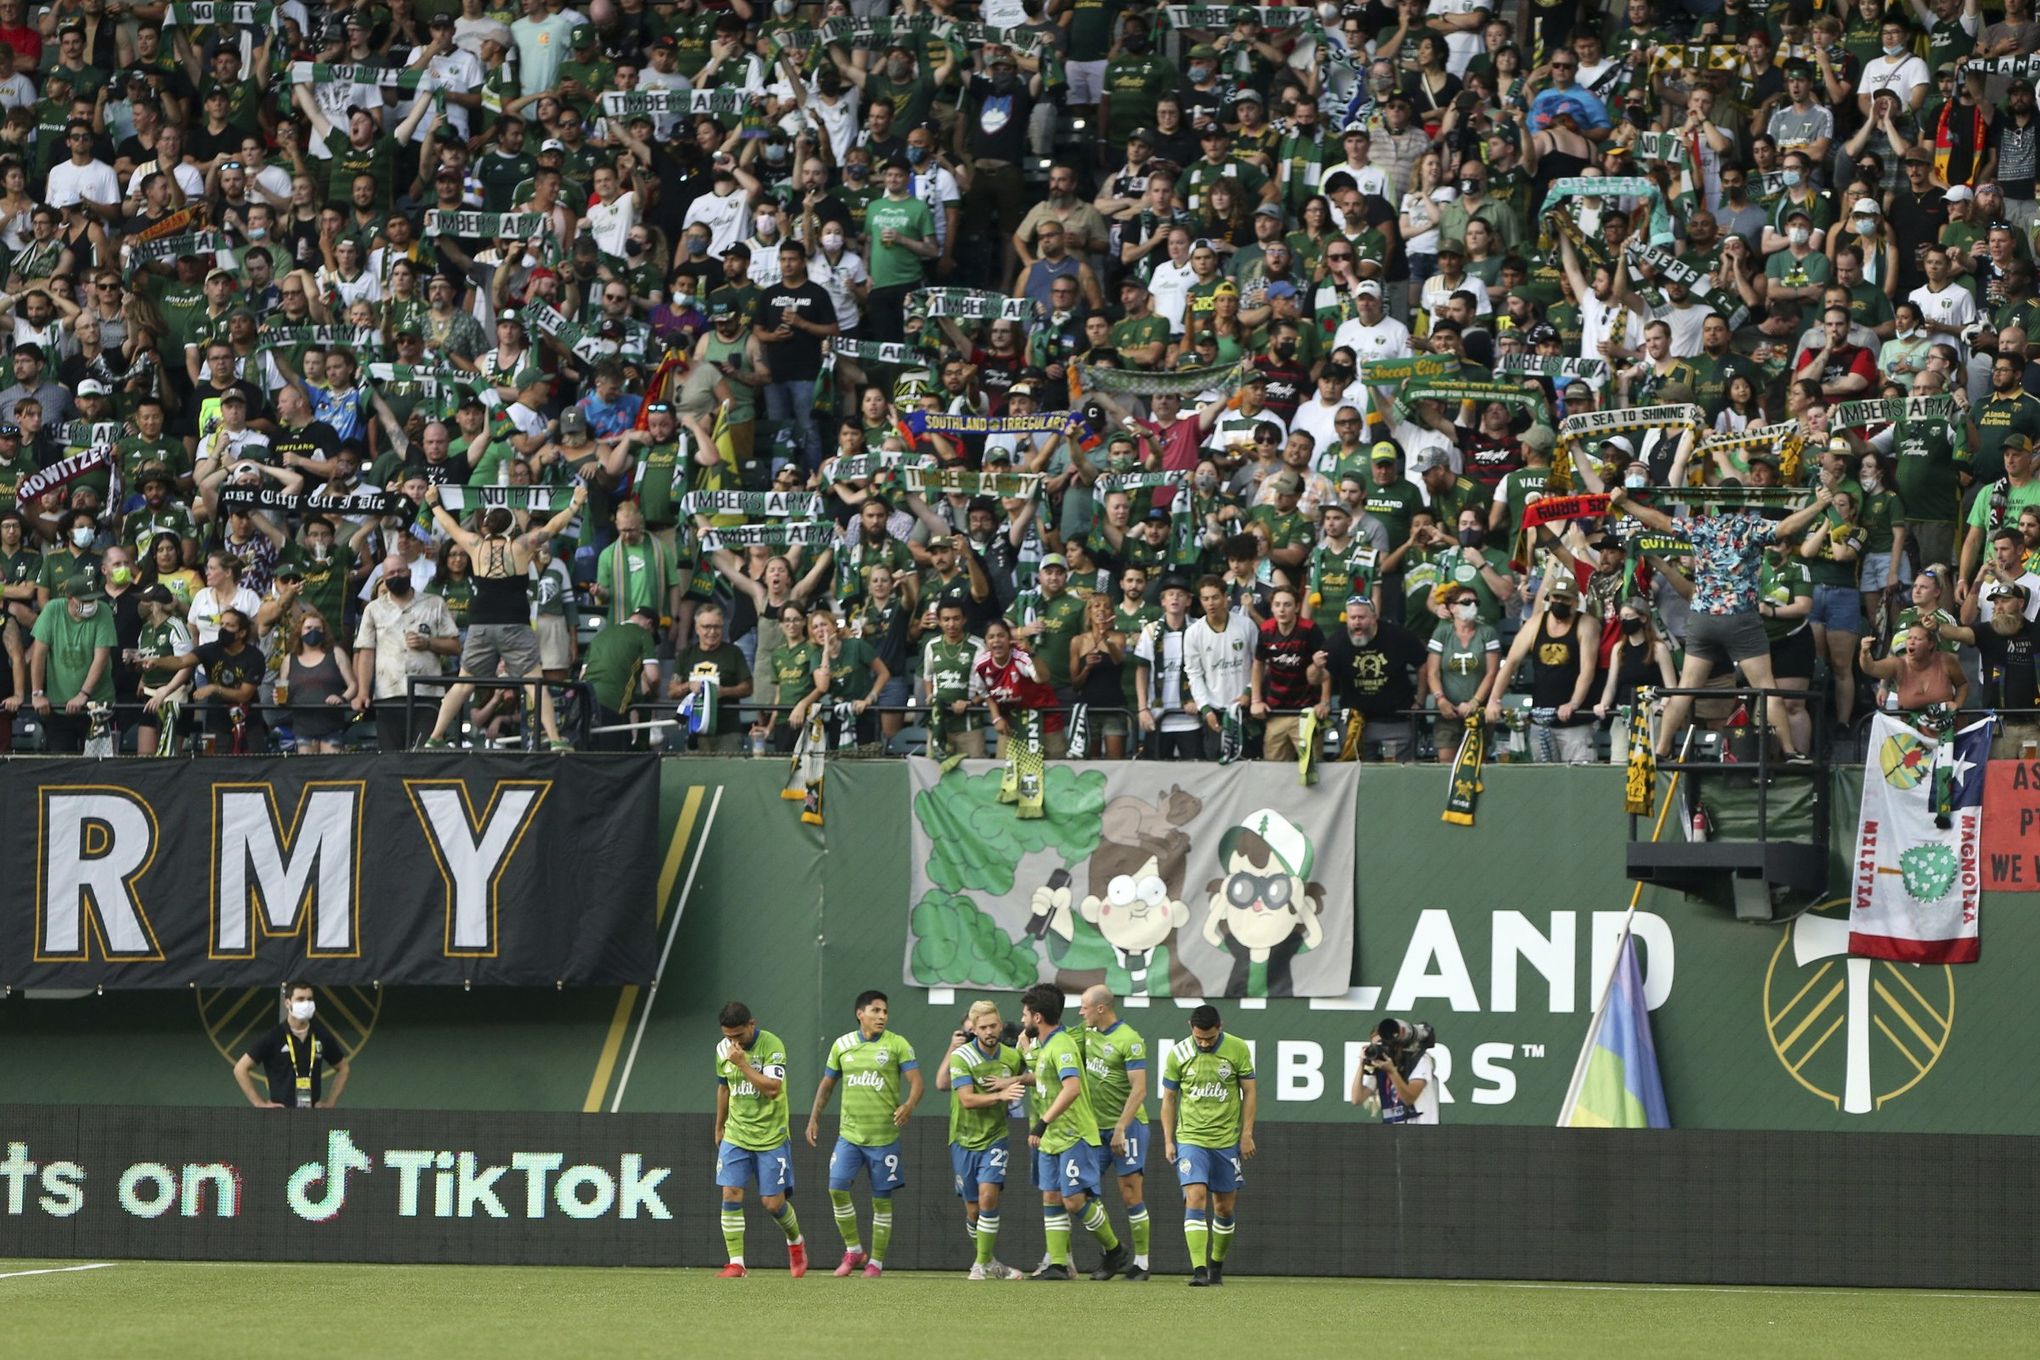 Columbus Crew concede last-minute goal in tie with Portland Timbers